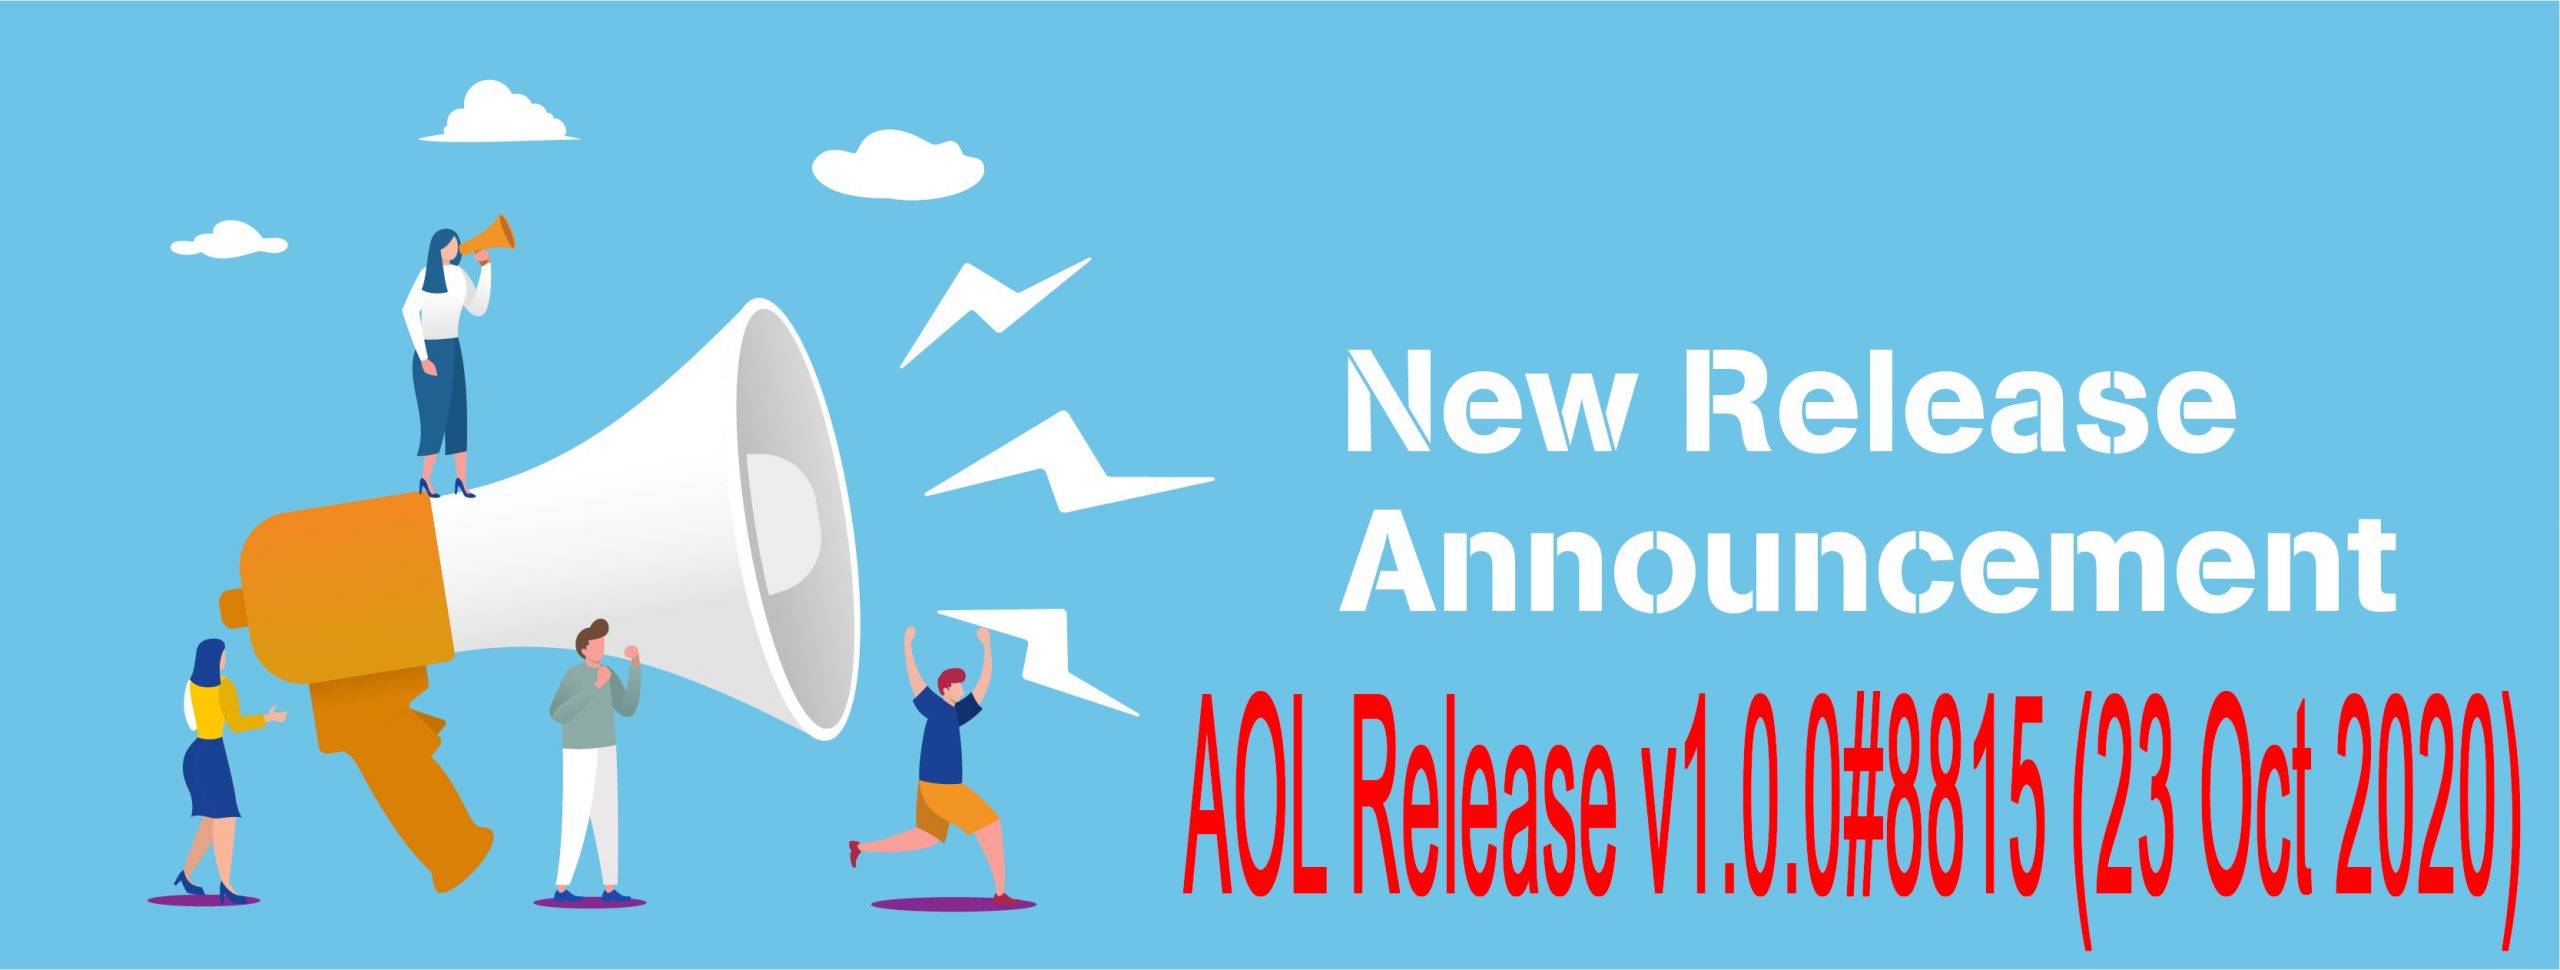 Accurate Online Release v1.0.0#8815 (23 Oct 2020)